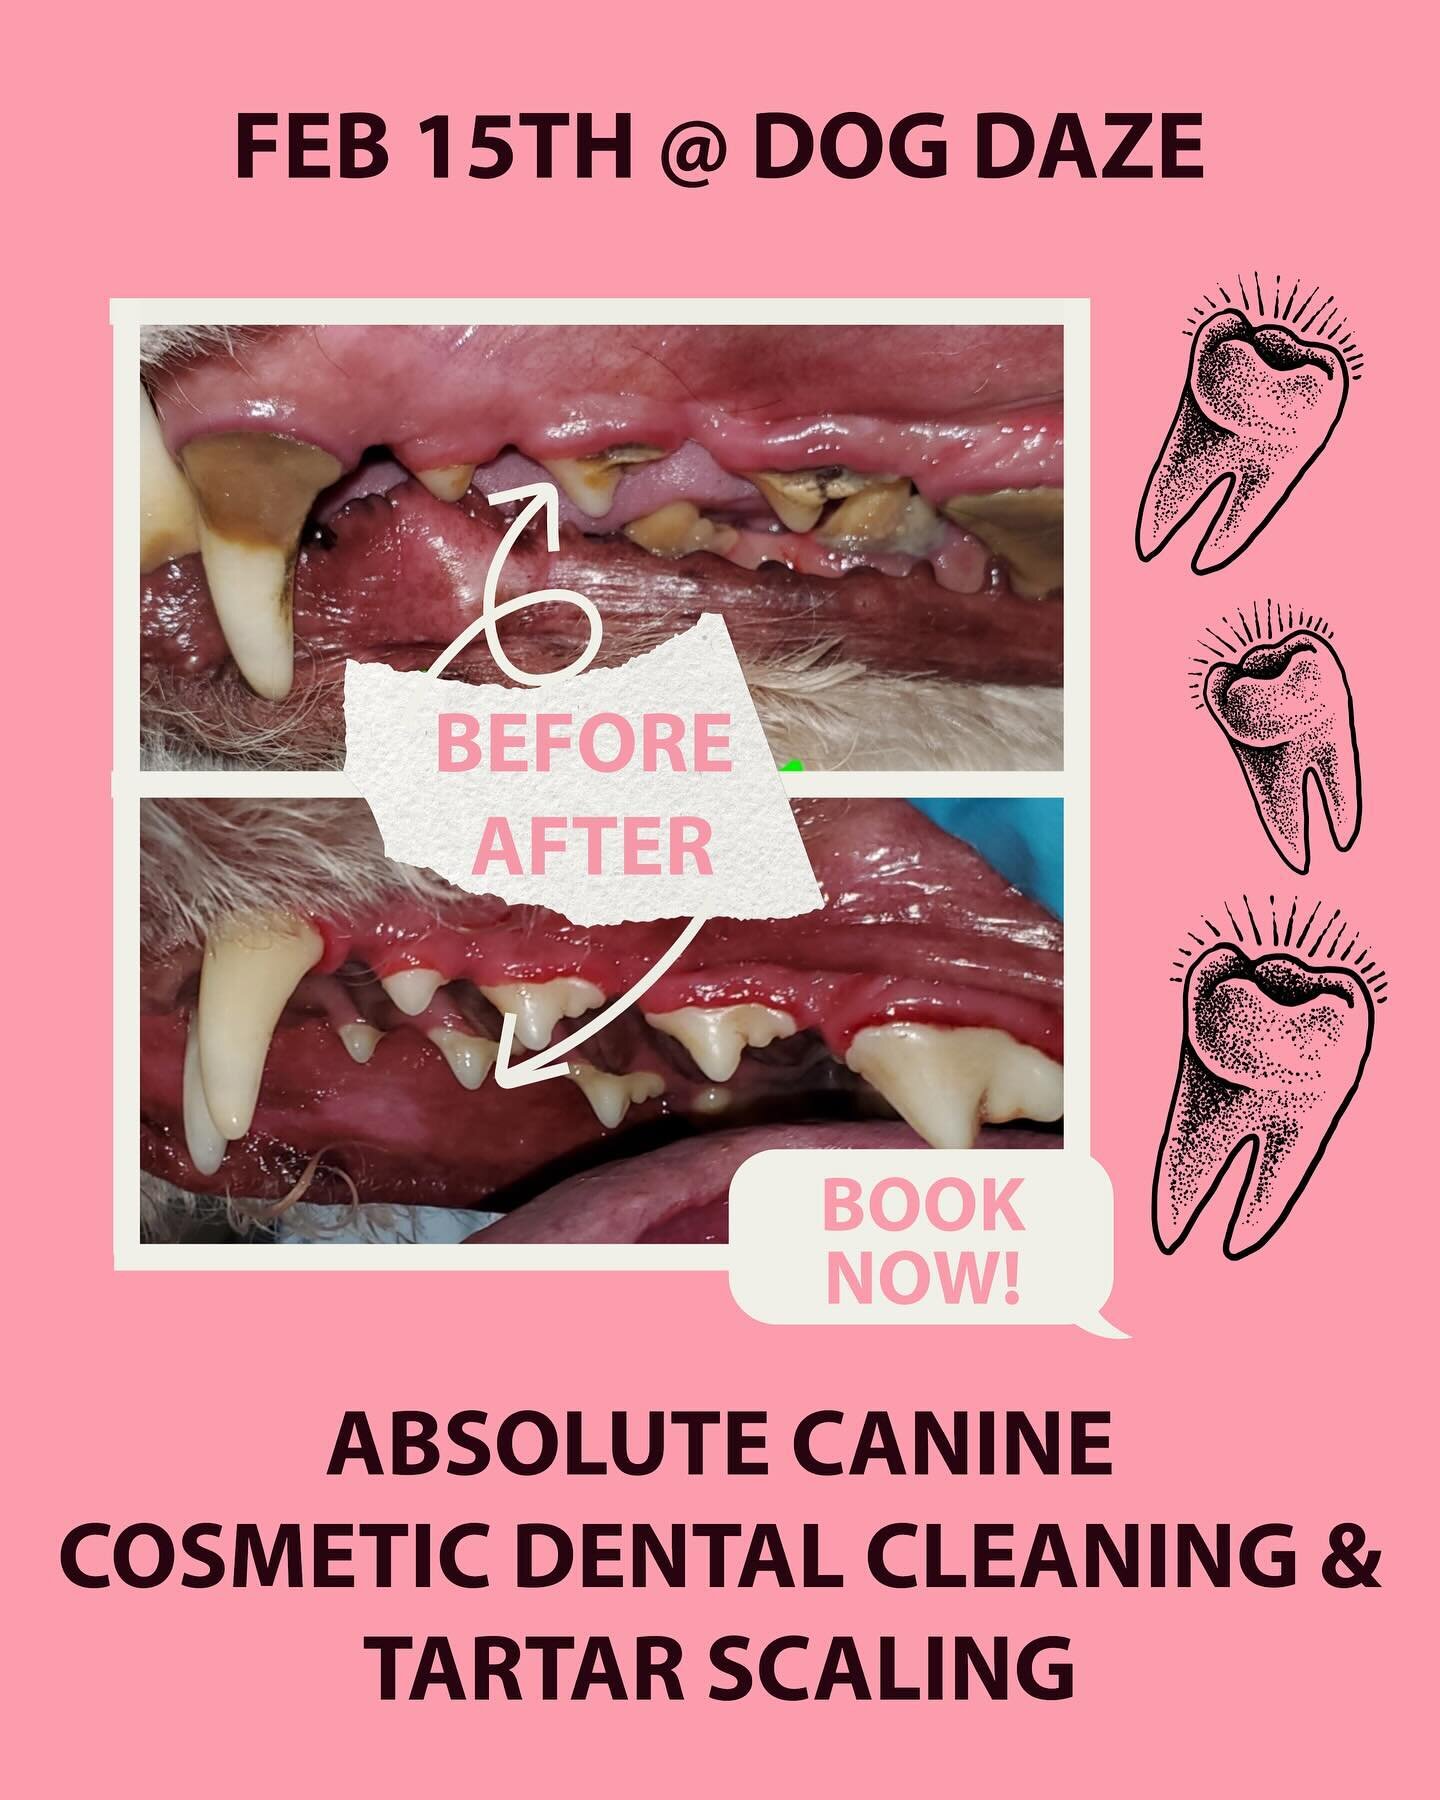 🌟 NEW DATE ADDED 🌟 
Due to popular demand, Absolute Canine is back in the shop for a second date this month. Appointments available for the morning of Thursday Feb 15th from 8:30am onwards. Absolute Canine offers cosmetic &ldquo;awake&rdquo; teeth 